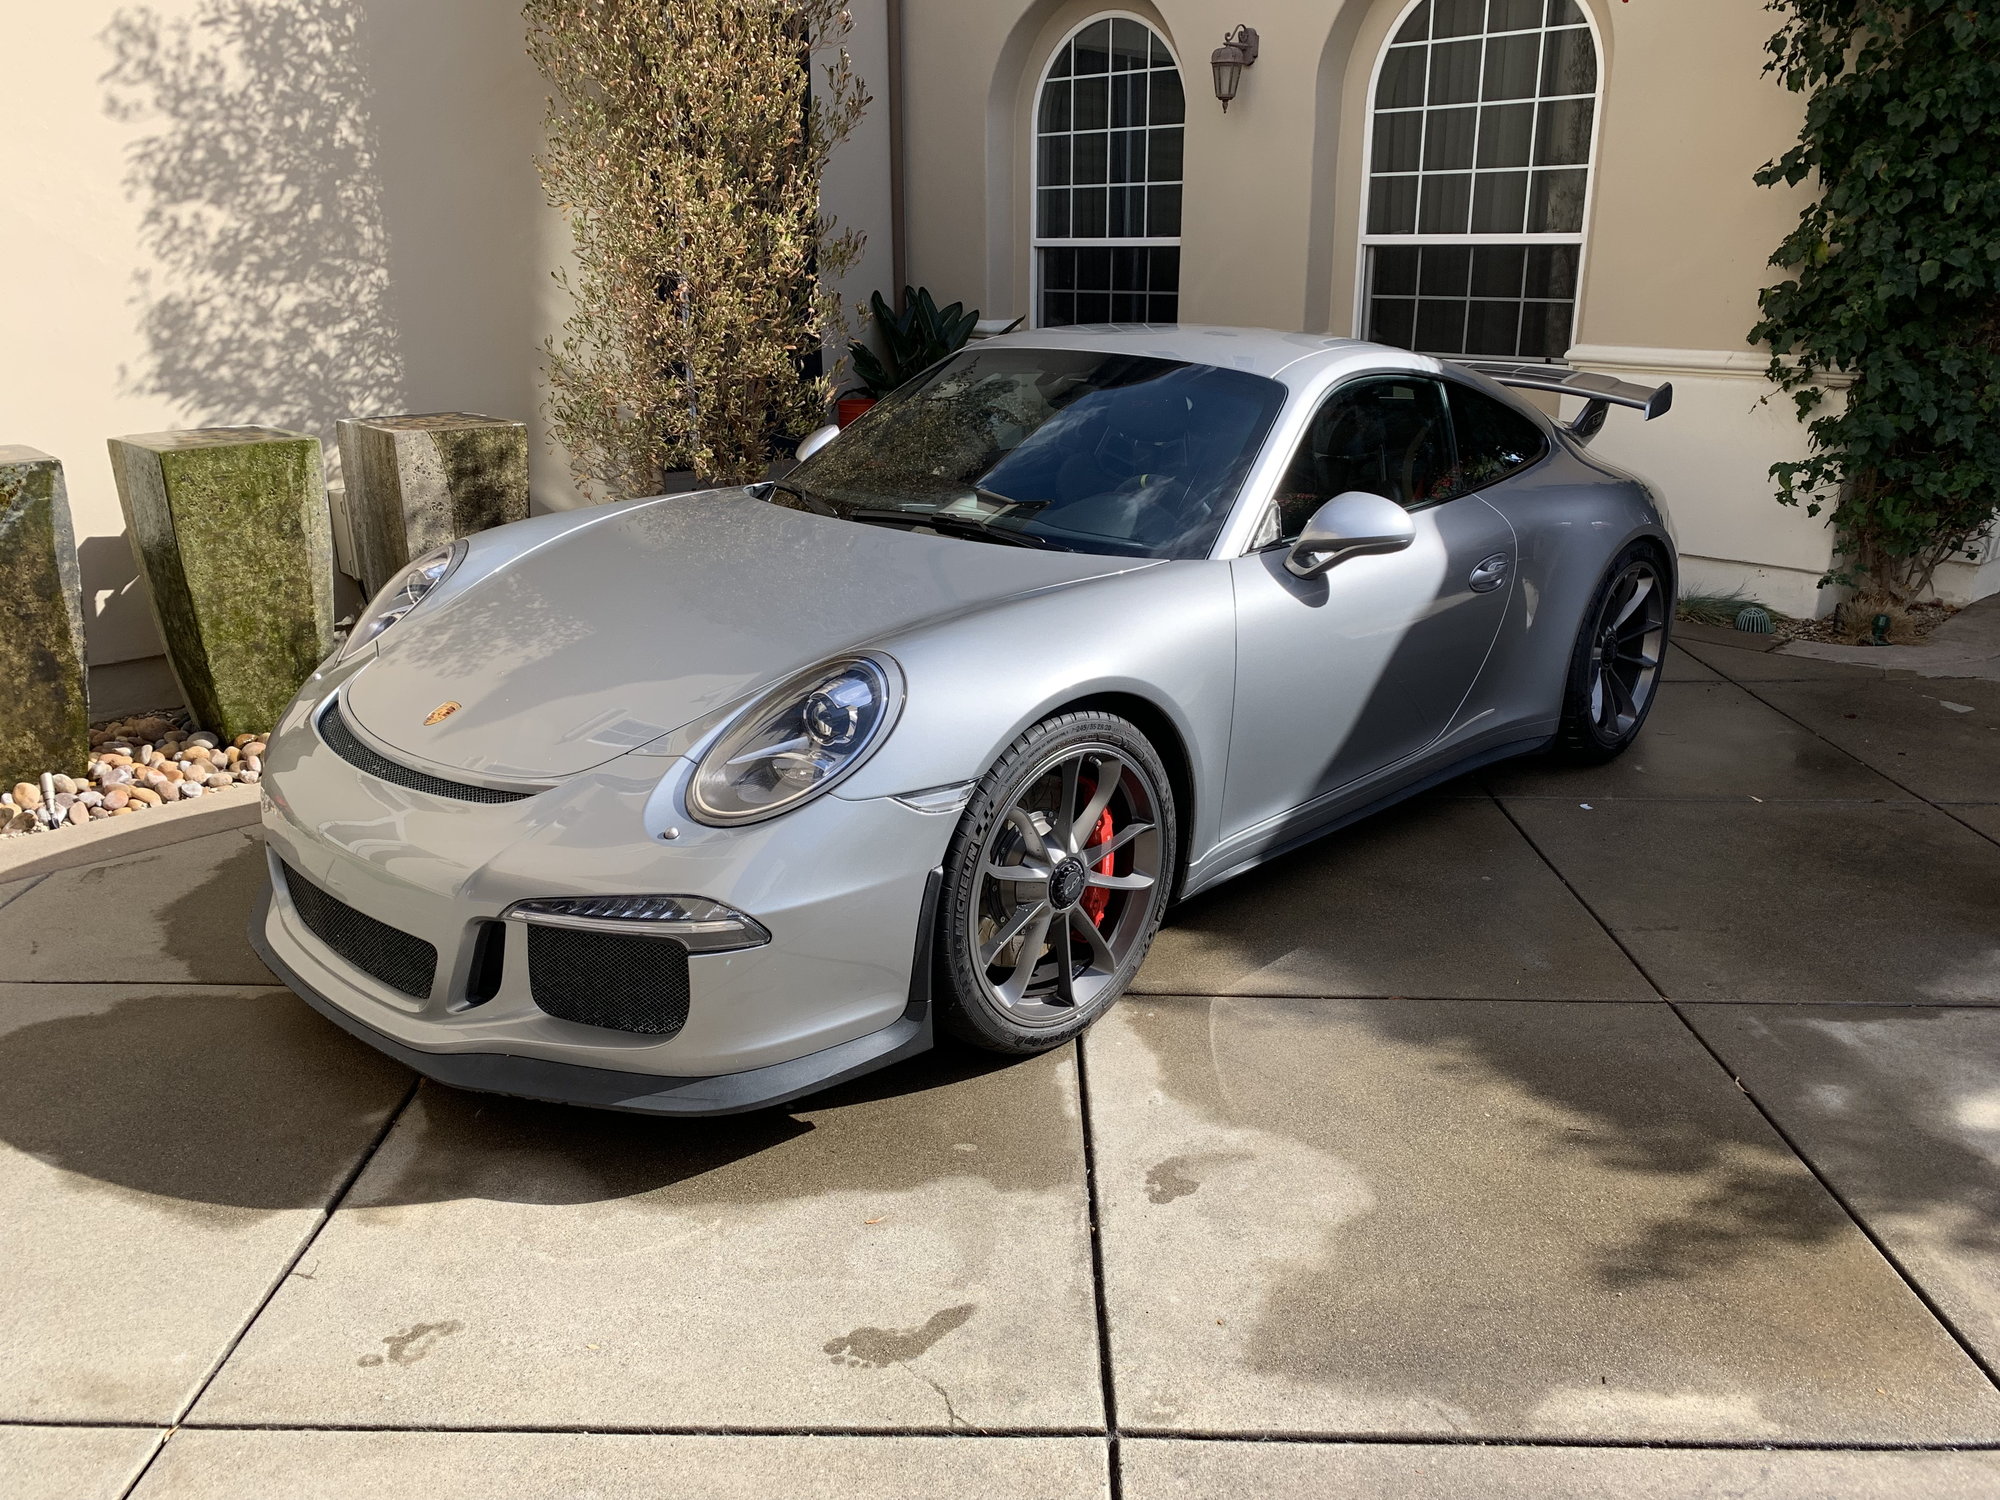 2015 Porsche GT3 - 2015 Porsche 911 GT3 in GT Silver Metallic - Used - VIN WP0AC2A90FS183868 - 17,600 Miles - 6 cyl - 2WD - Automatic - Coupe - Silver - Orange County, CA 92660, United States